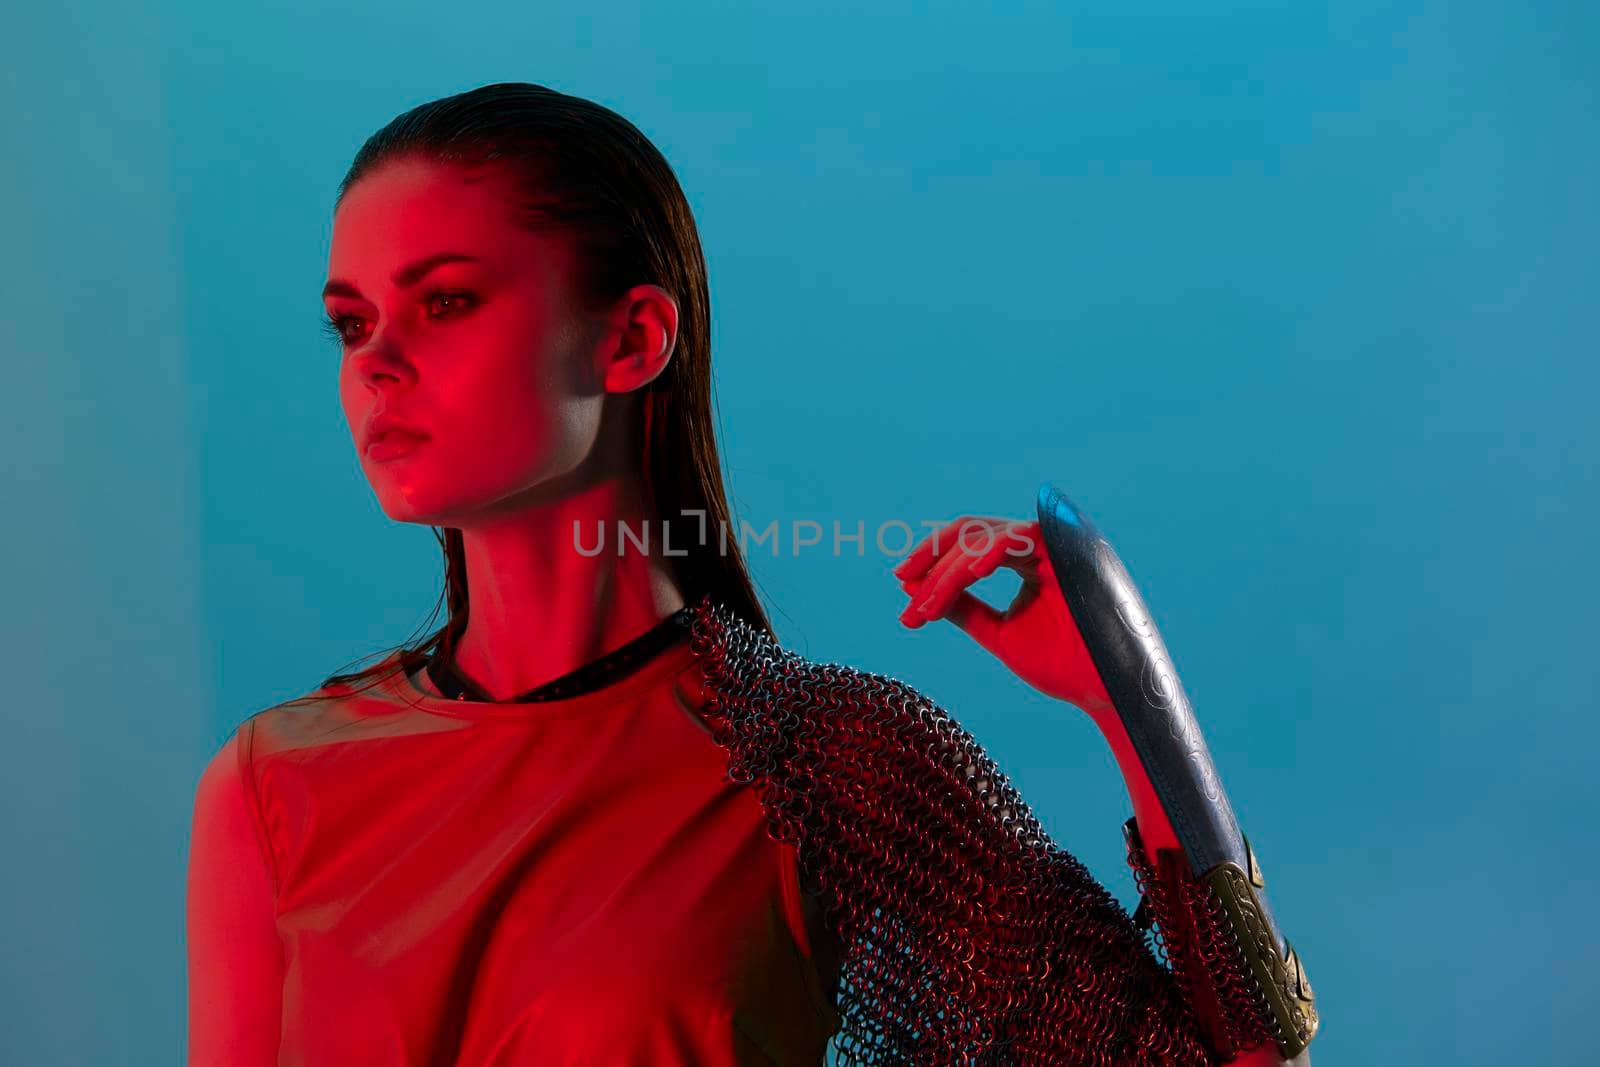 attractive woman Glamor posing red light metal armor on hand Lifestyle unaltered. High quality photo